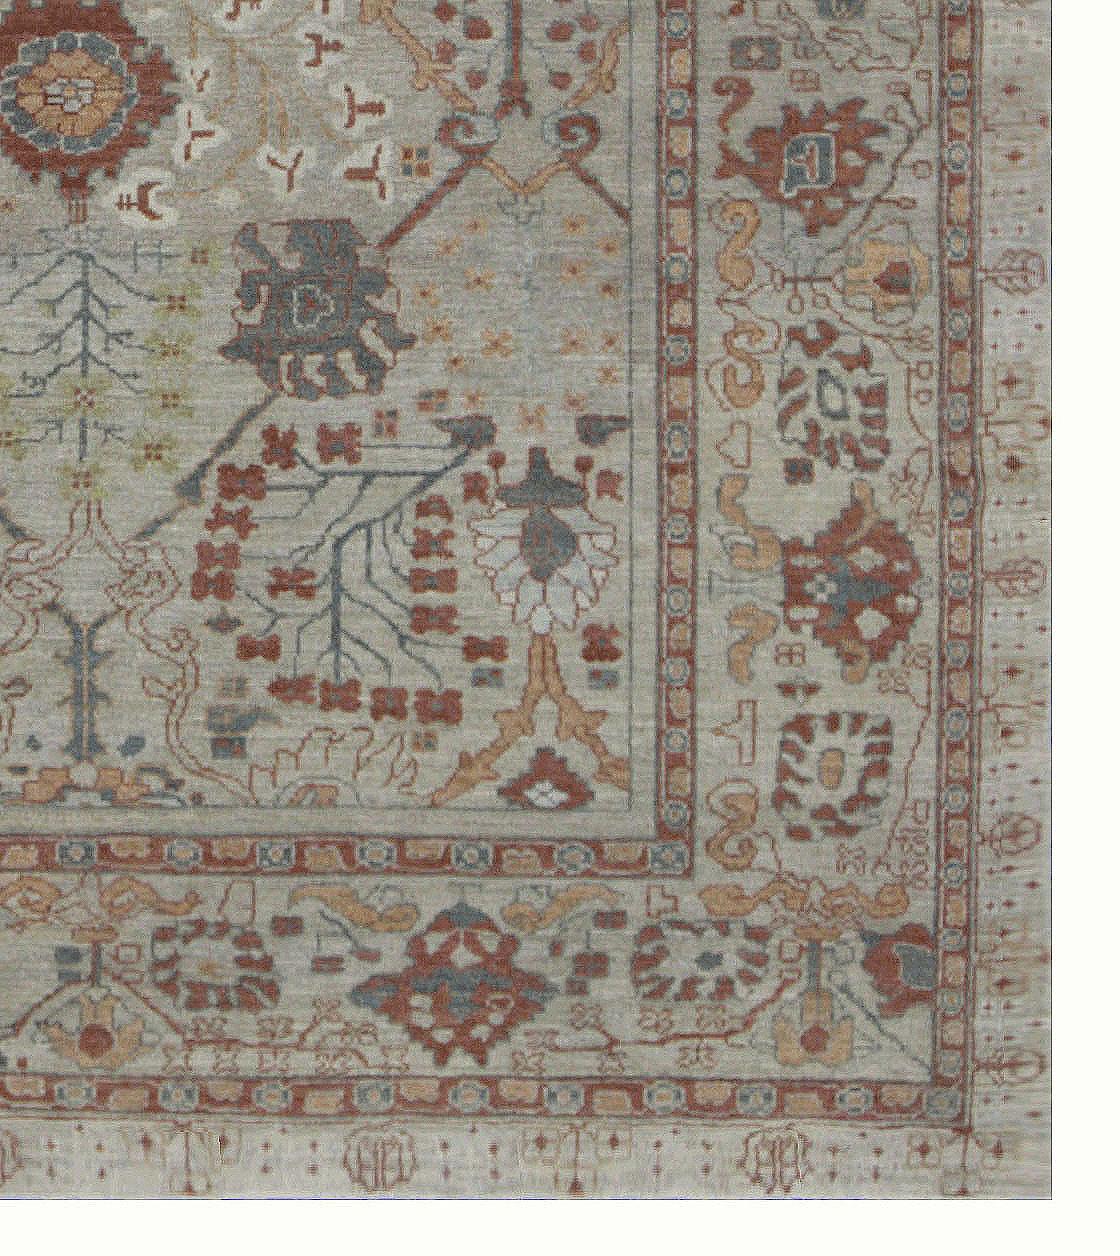 Modern Turkish rug made of handwoven sheep’s wool of the finest quality. It’s colored with organic vegetable dyes that are certified safe for humans and pets alike. It features a beautiful beige field with red and gray flower details closely